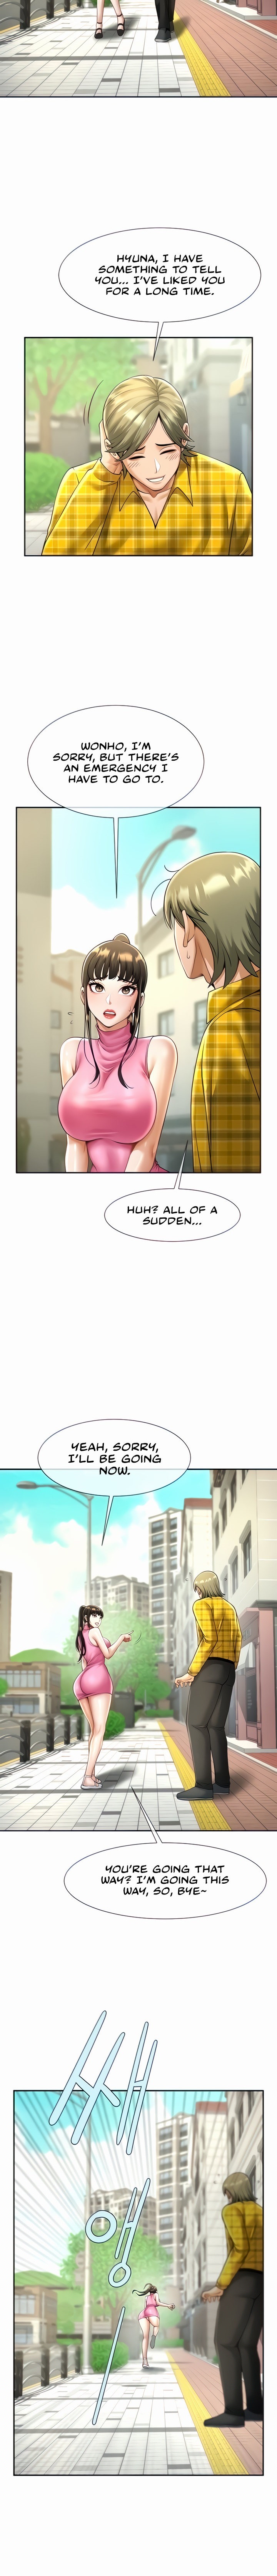 The Cheat Code Hitter Fucks Them All - Chapter 14 Page 2